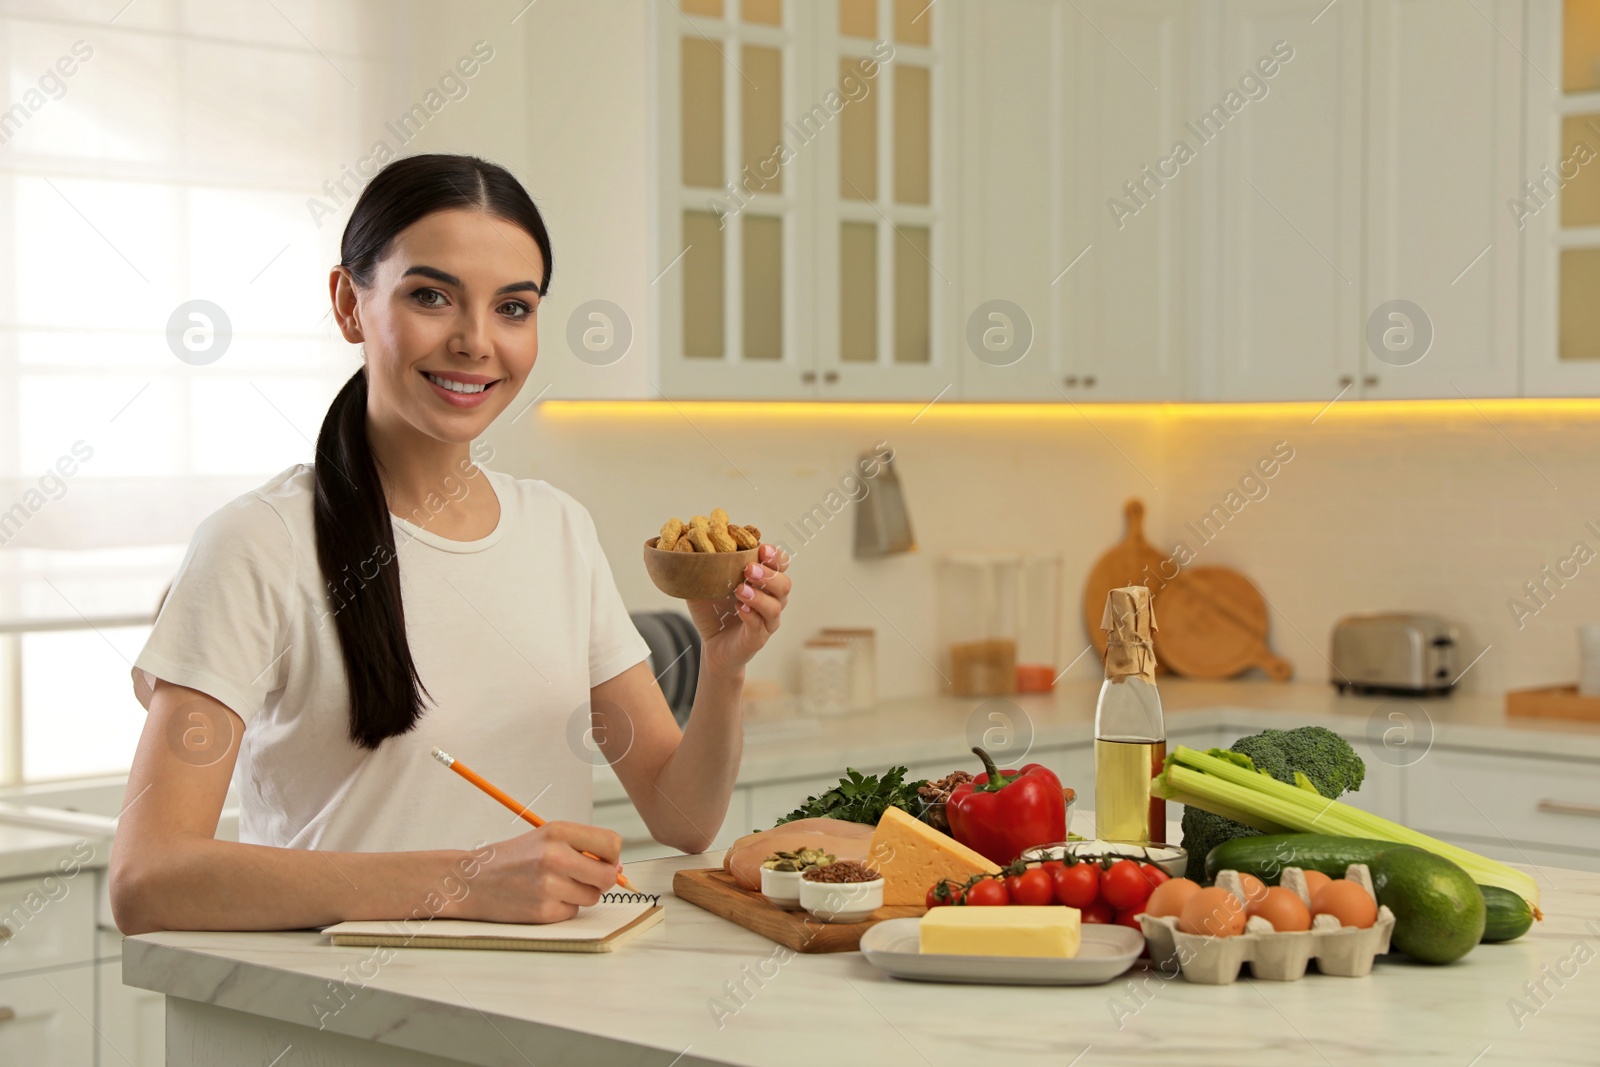 Photo of Happy woman writing in notebook near products at table. Keto diet